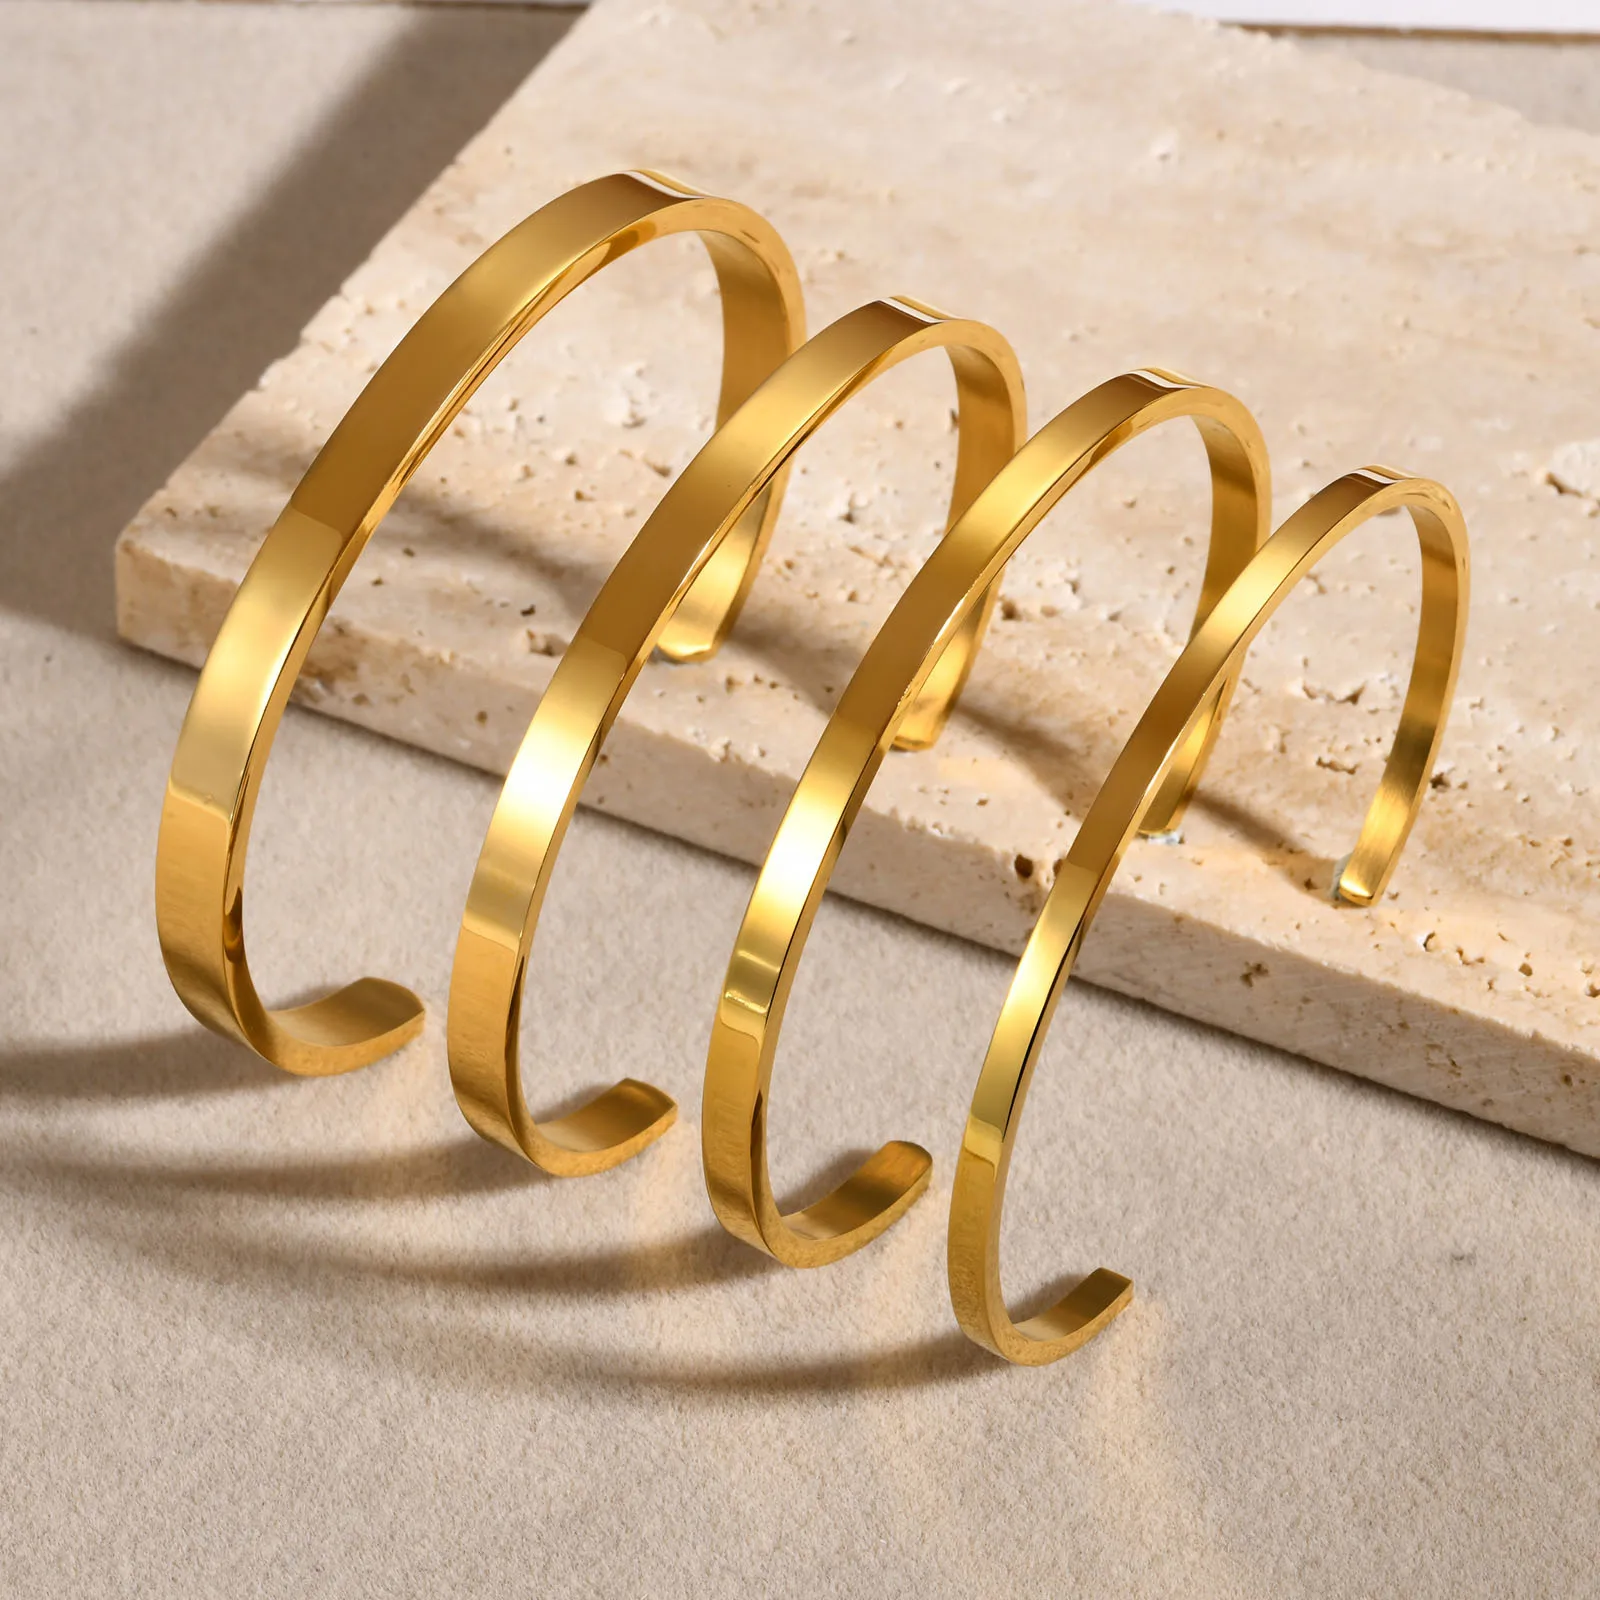 

Hot Selling Stainless Steel Bracelets Simple Gold Bangle Designs Open Cuff Bangle For Women's Jewelry